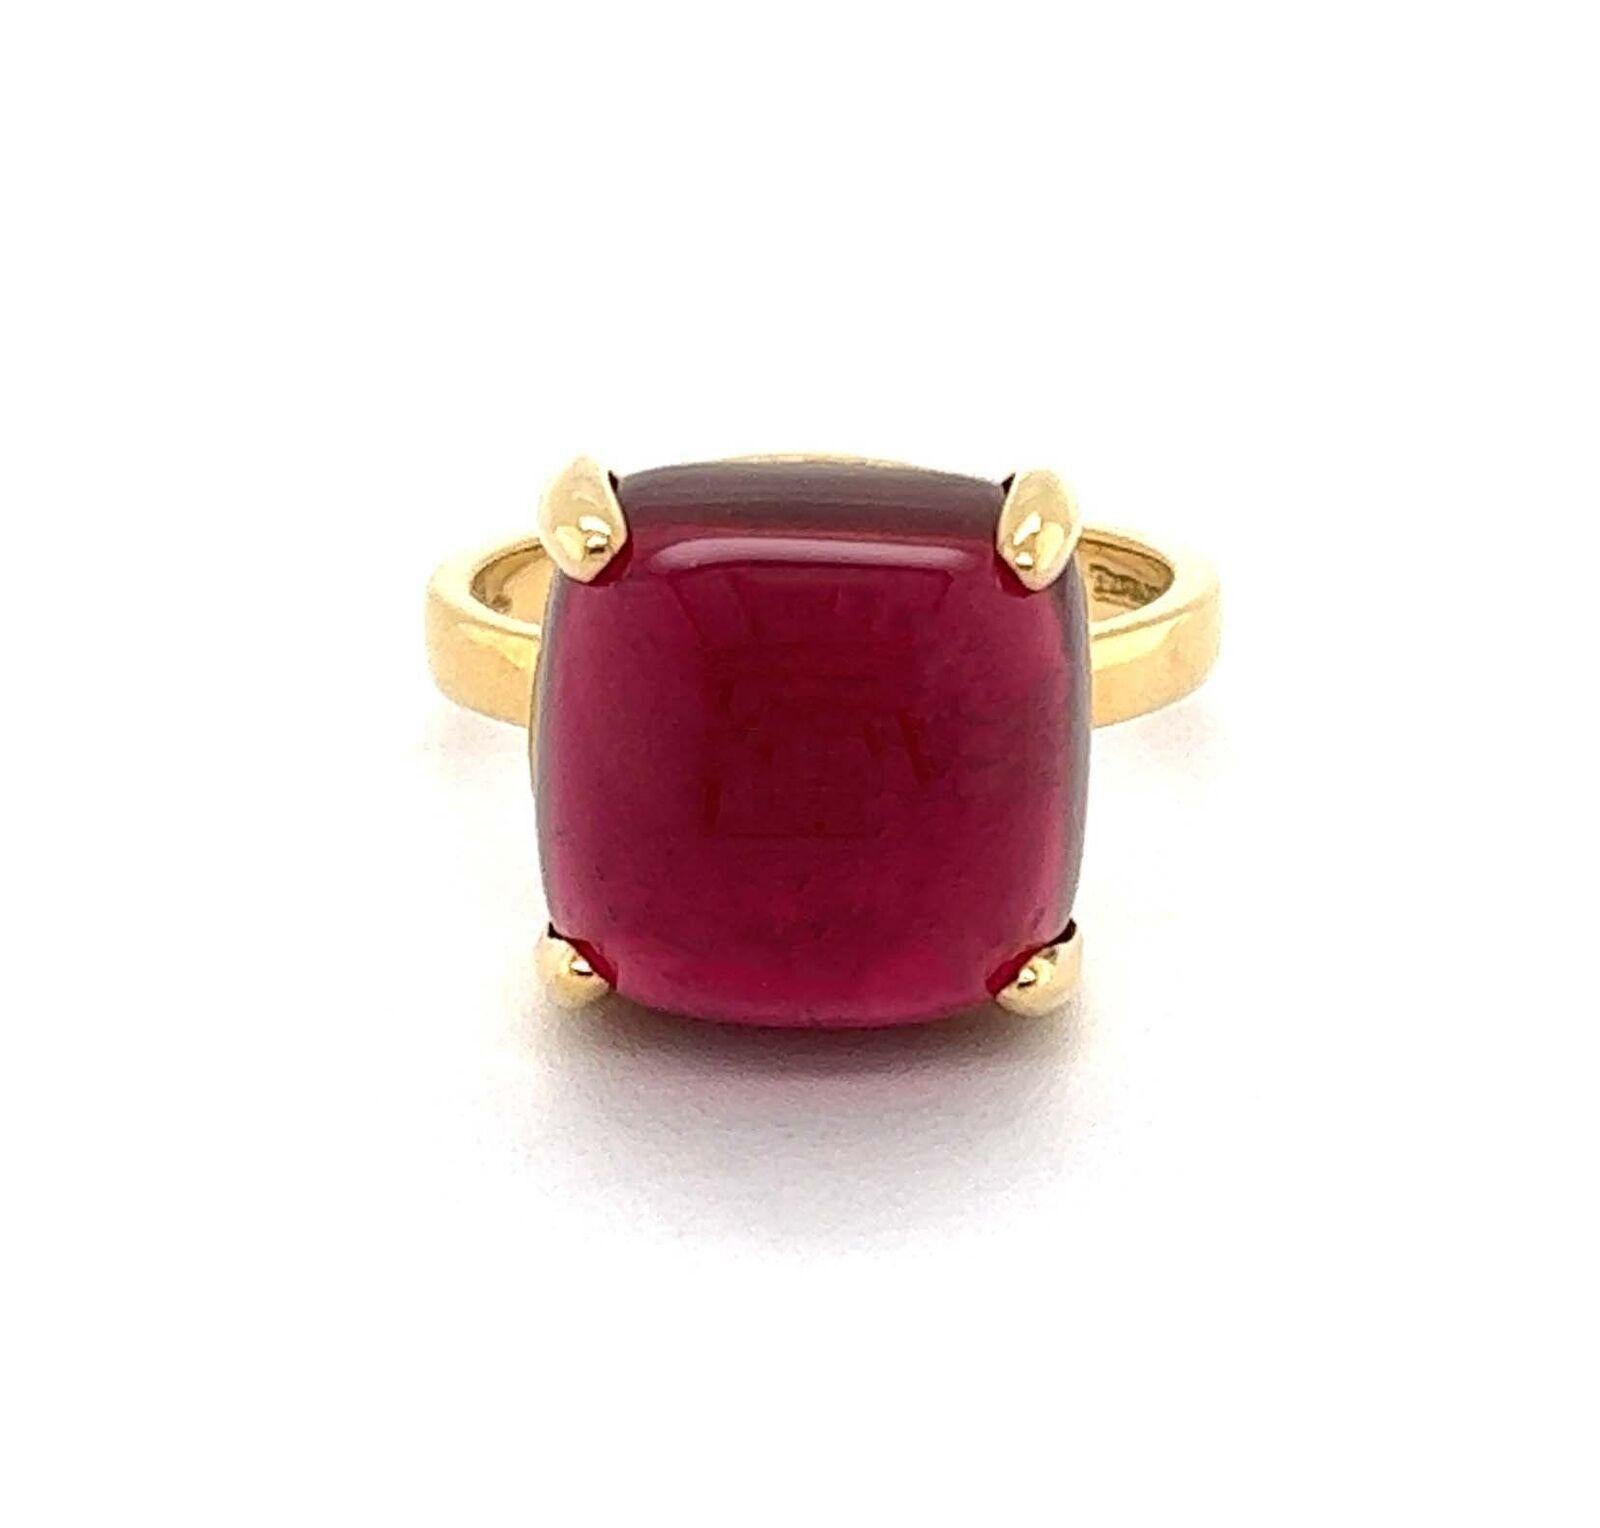 Women's Tiffany & Co. Picasso 18k Yellow Gold Sugar Stacks Rubellite Ring - Size 7